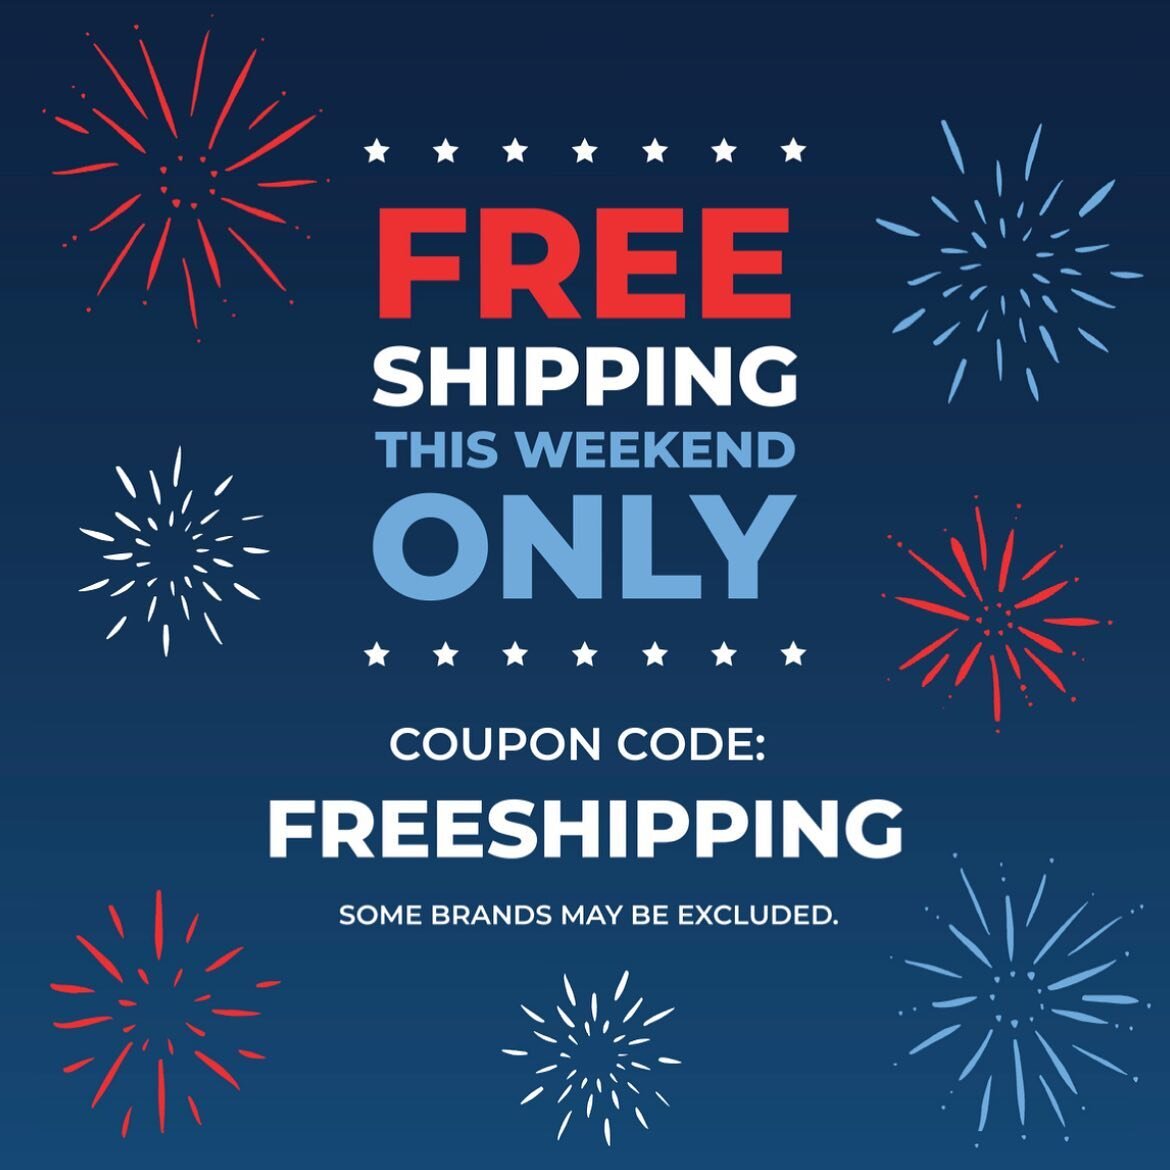 Shop online for great savings and Free Shipping!!